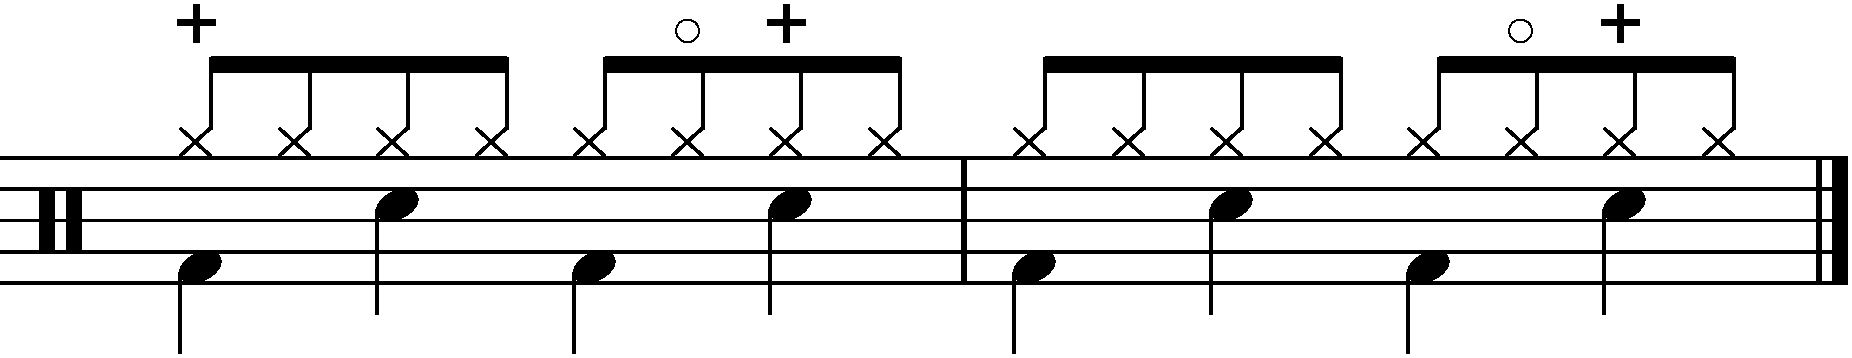 The Hi Hat Part for example 1 with groove added in